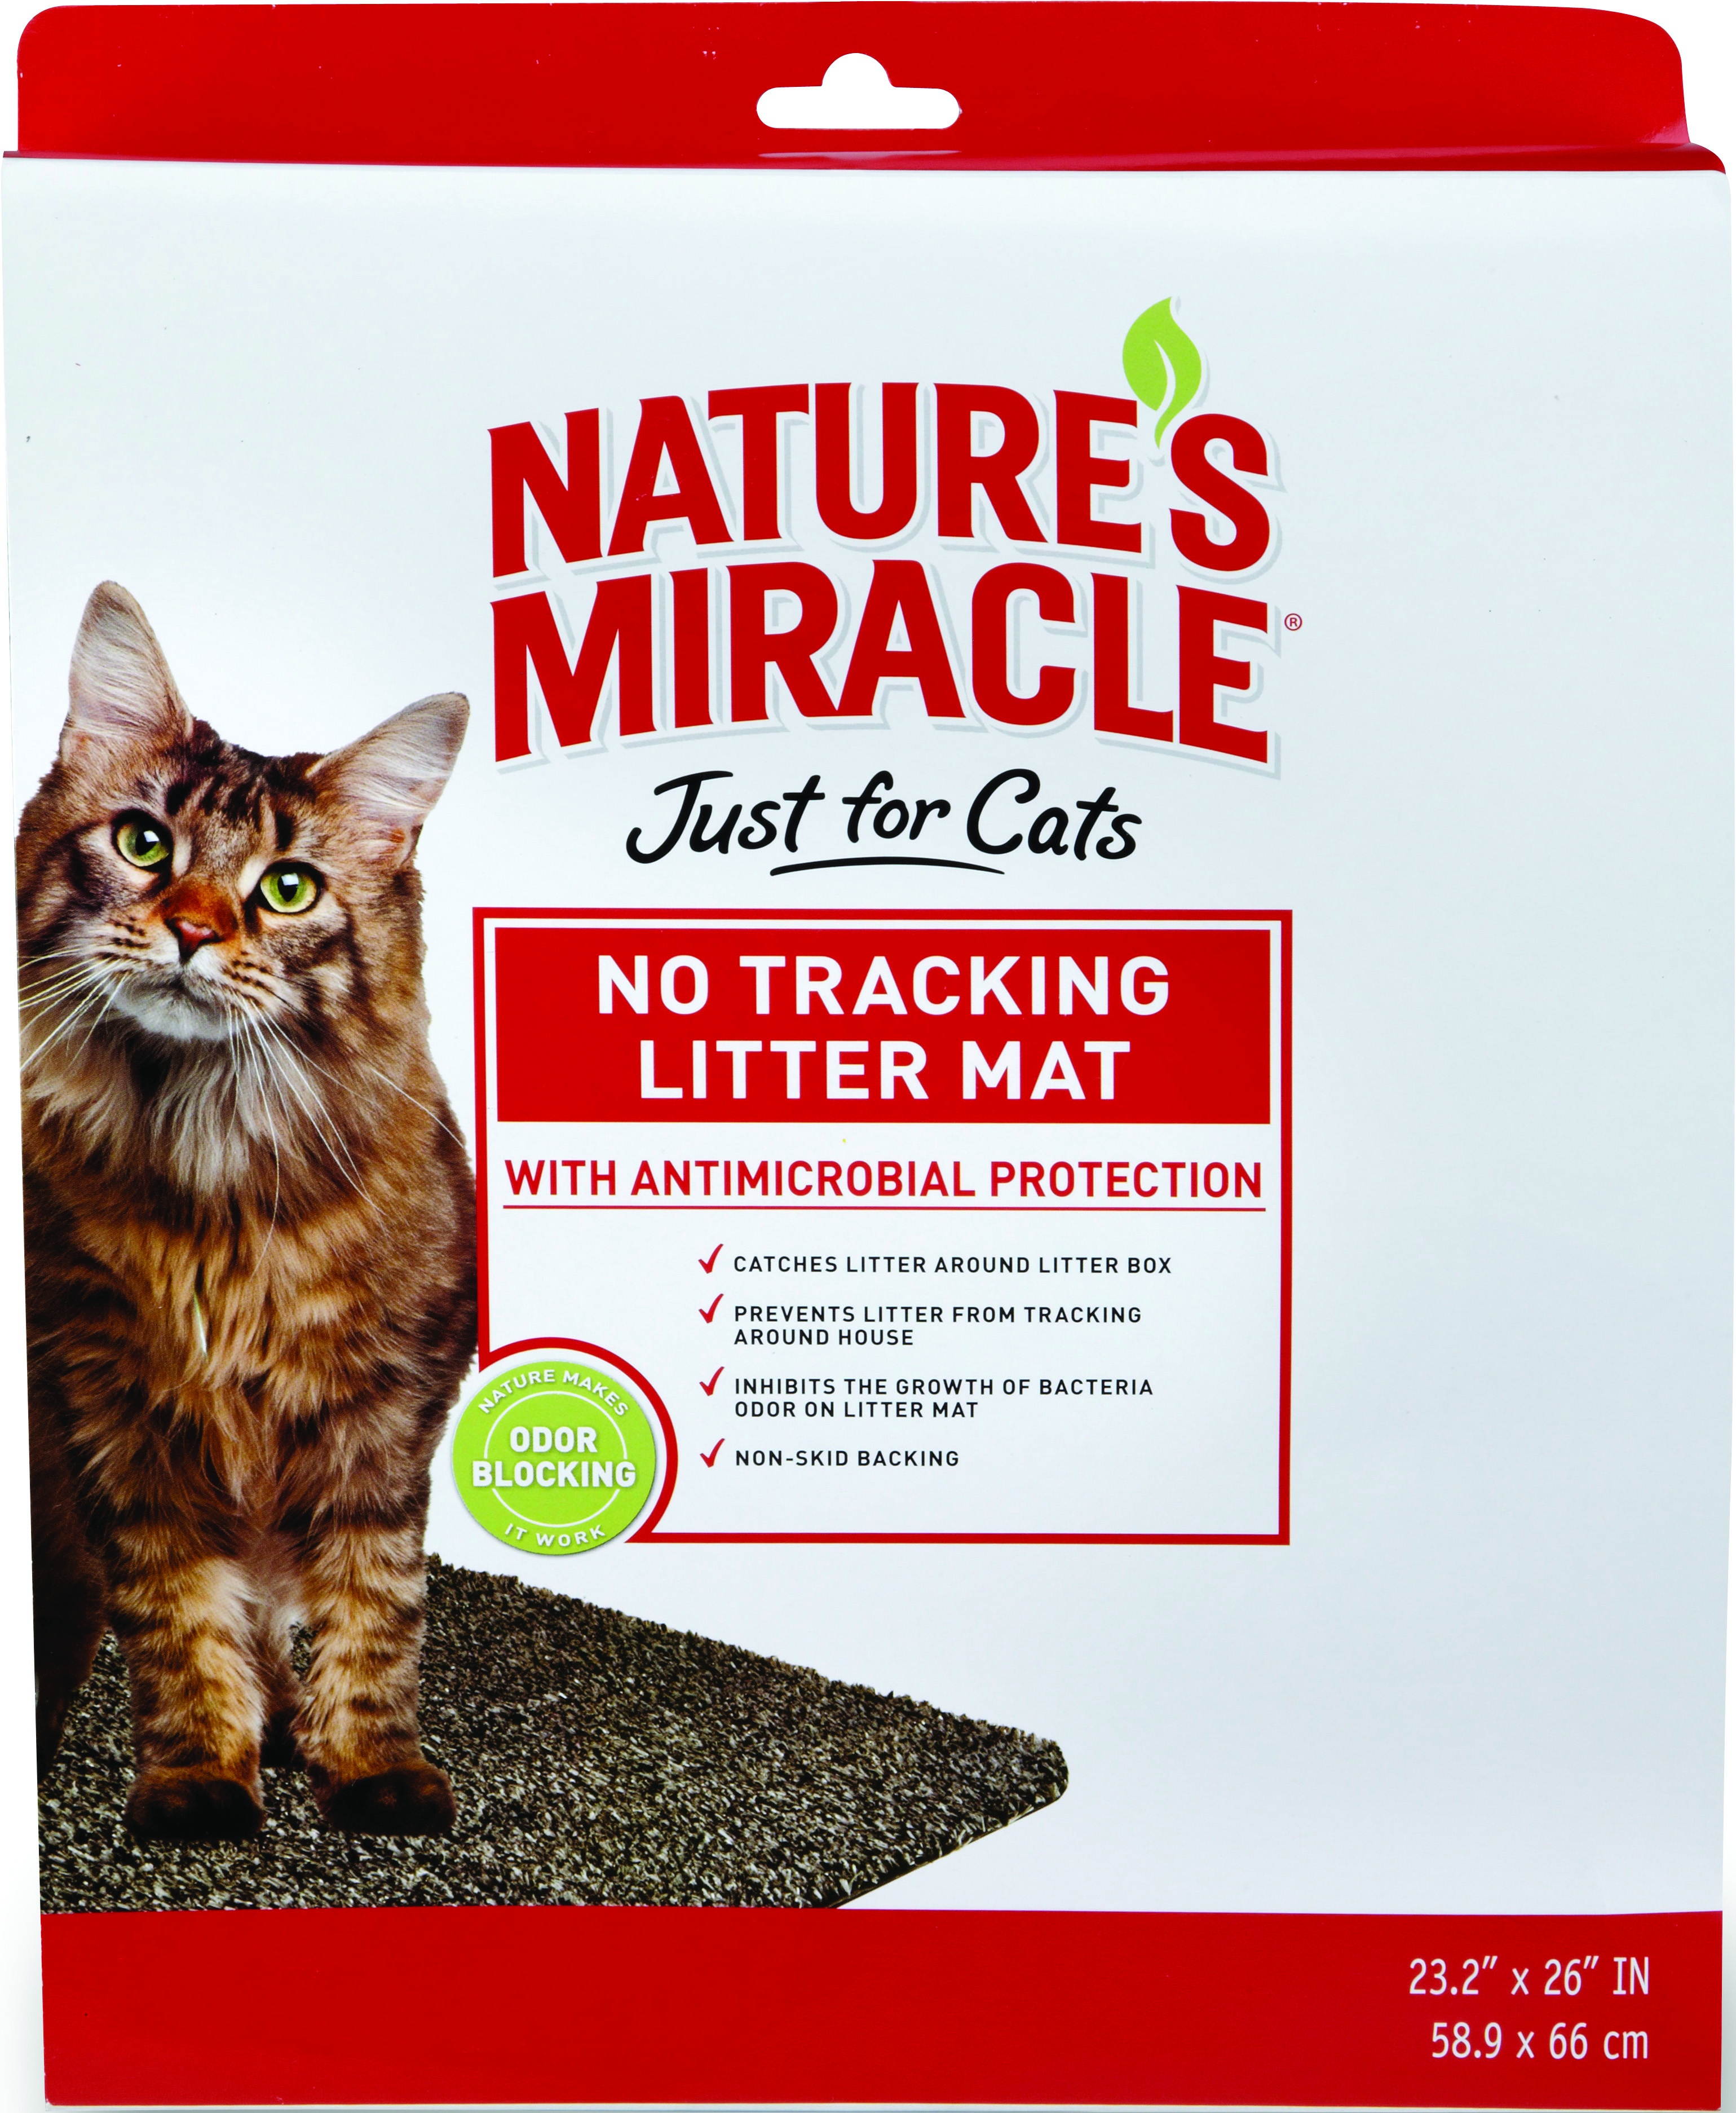 NATURES MIRACLE NO MORE TRACKING LITTER MAT